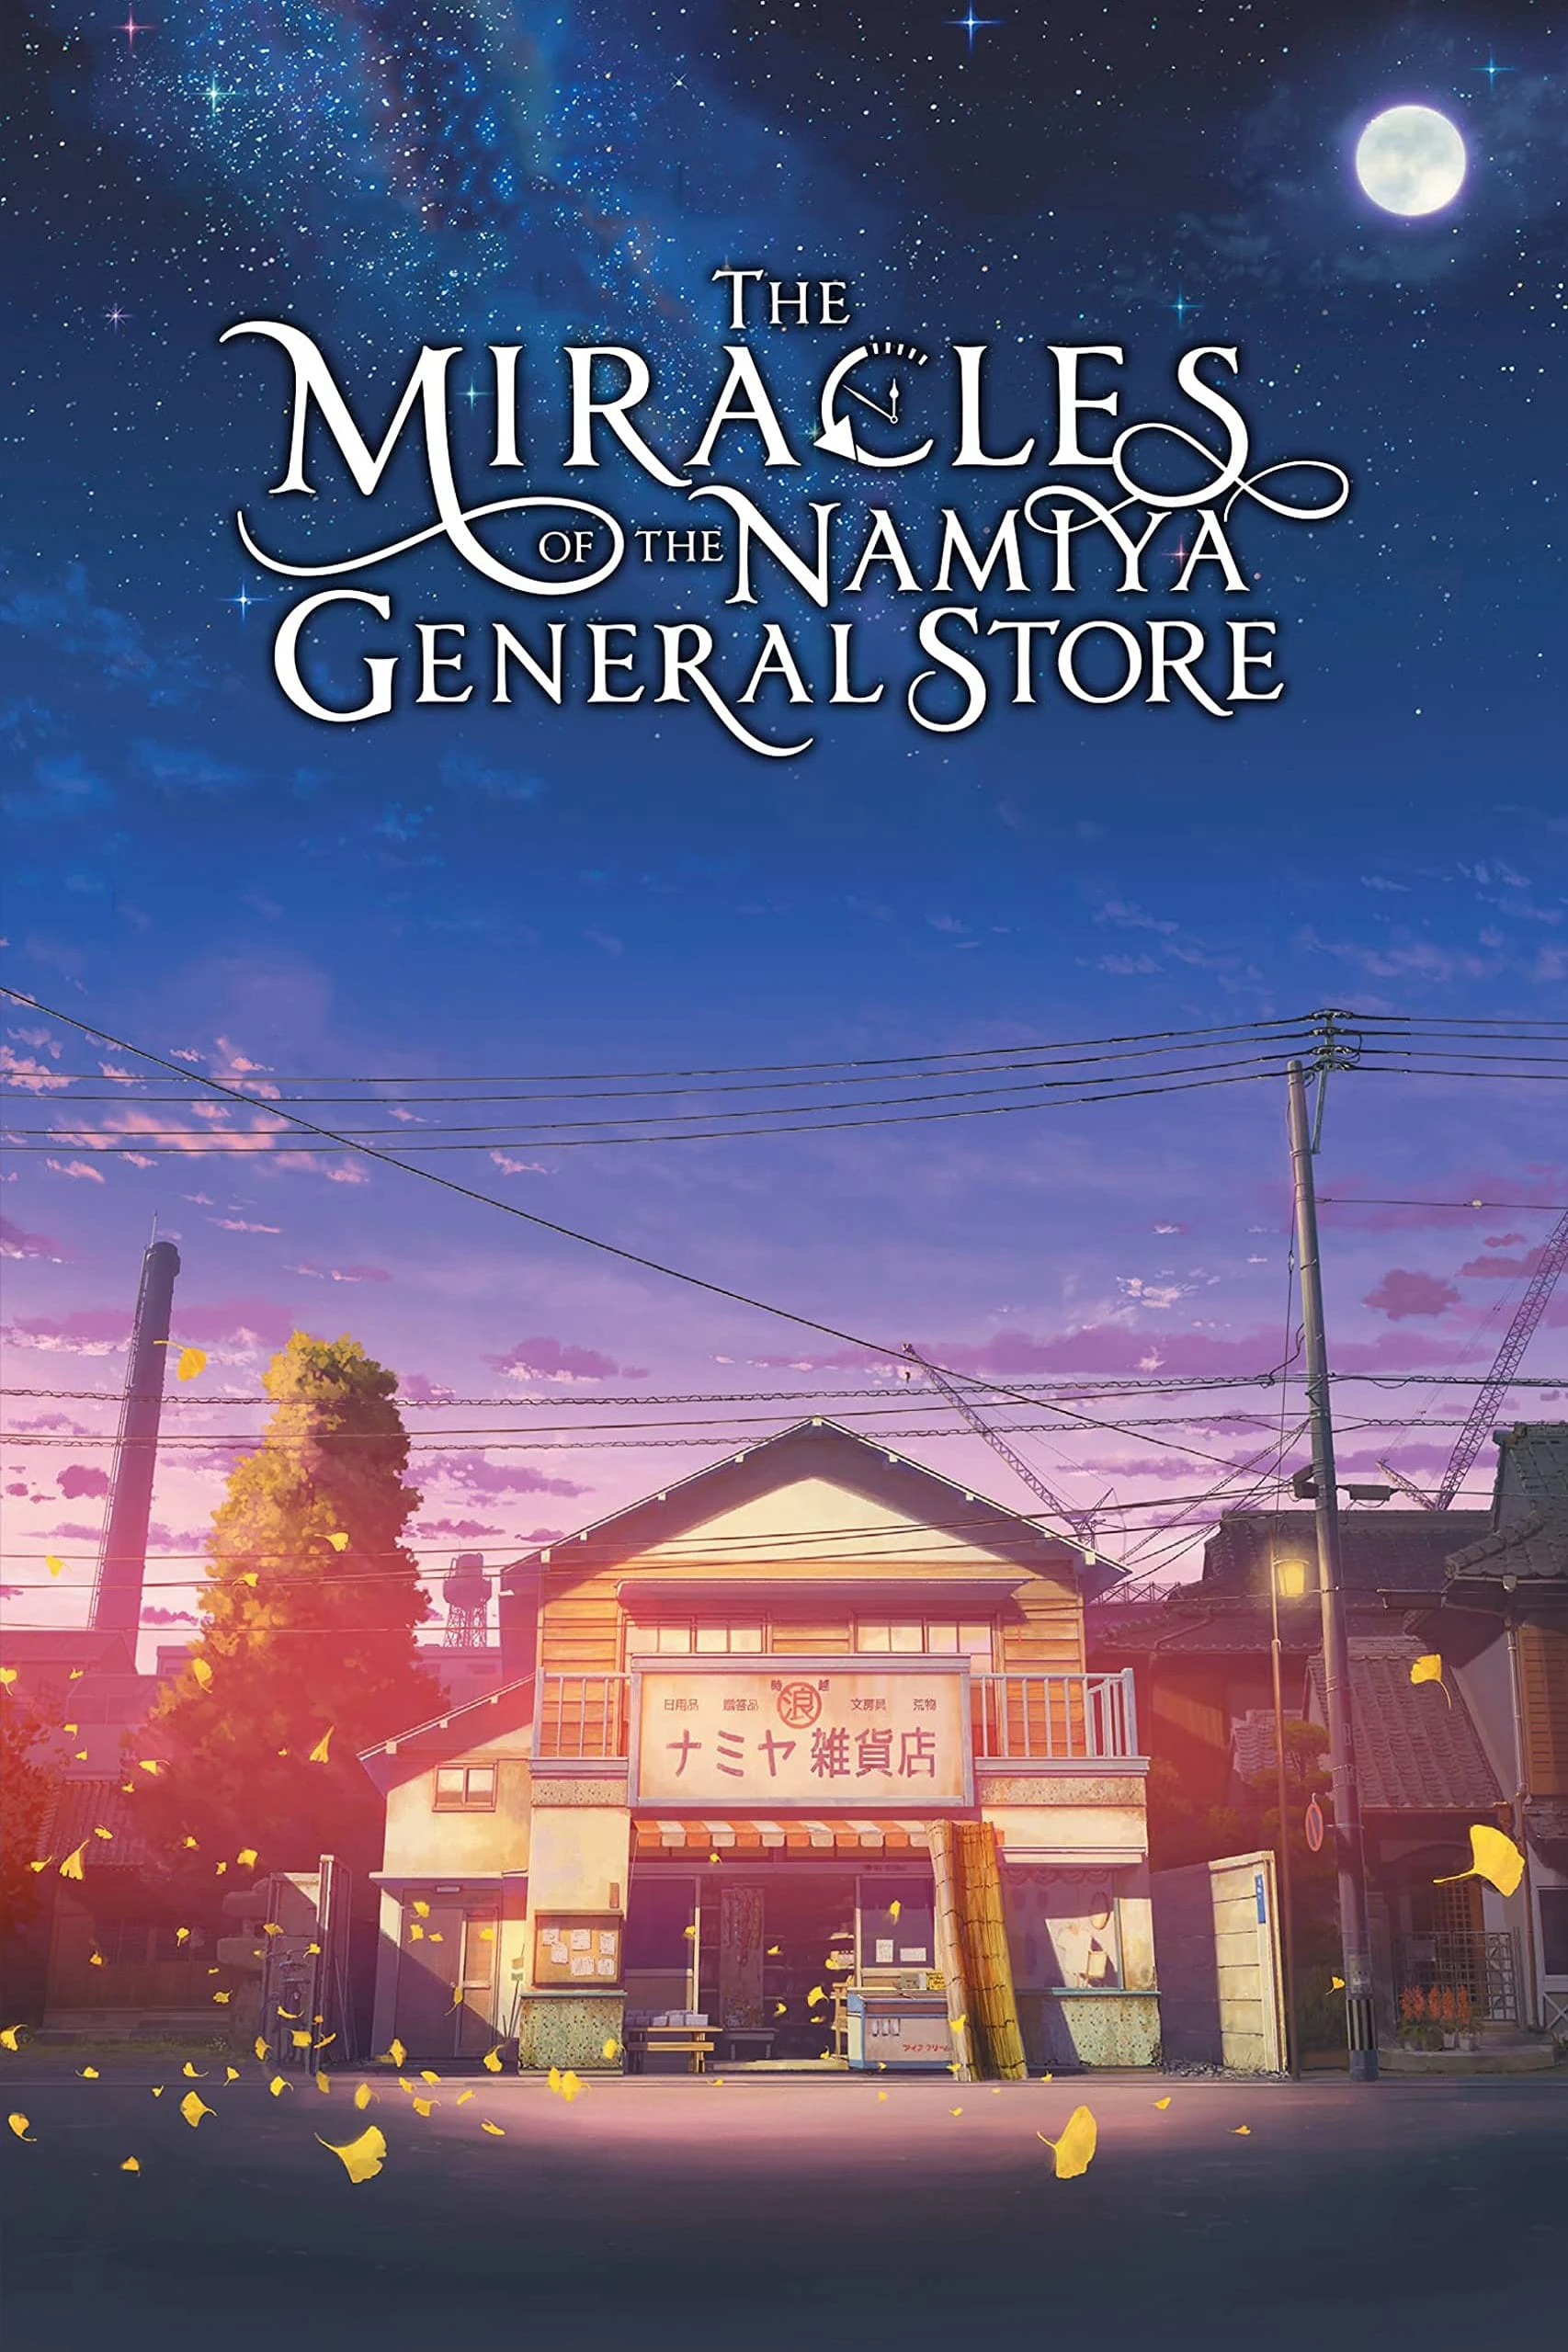 The Miracles of the Namiya General Store | The Miracles of the Namiya General Store (2017)